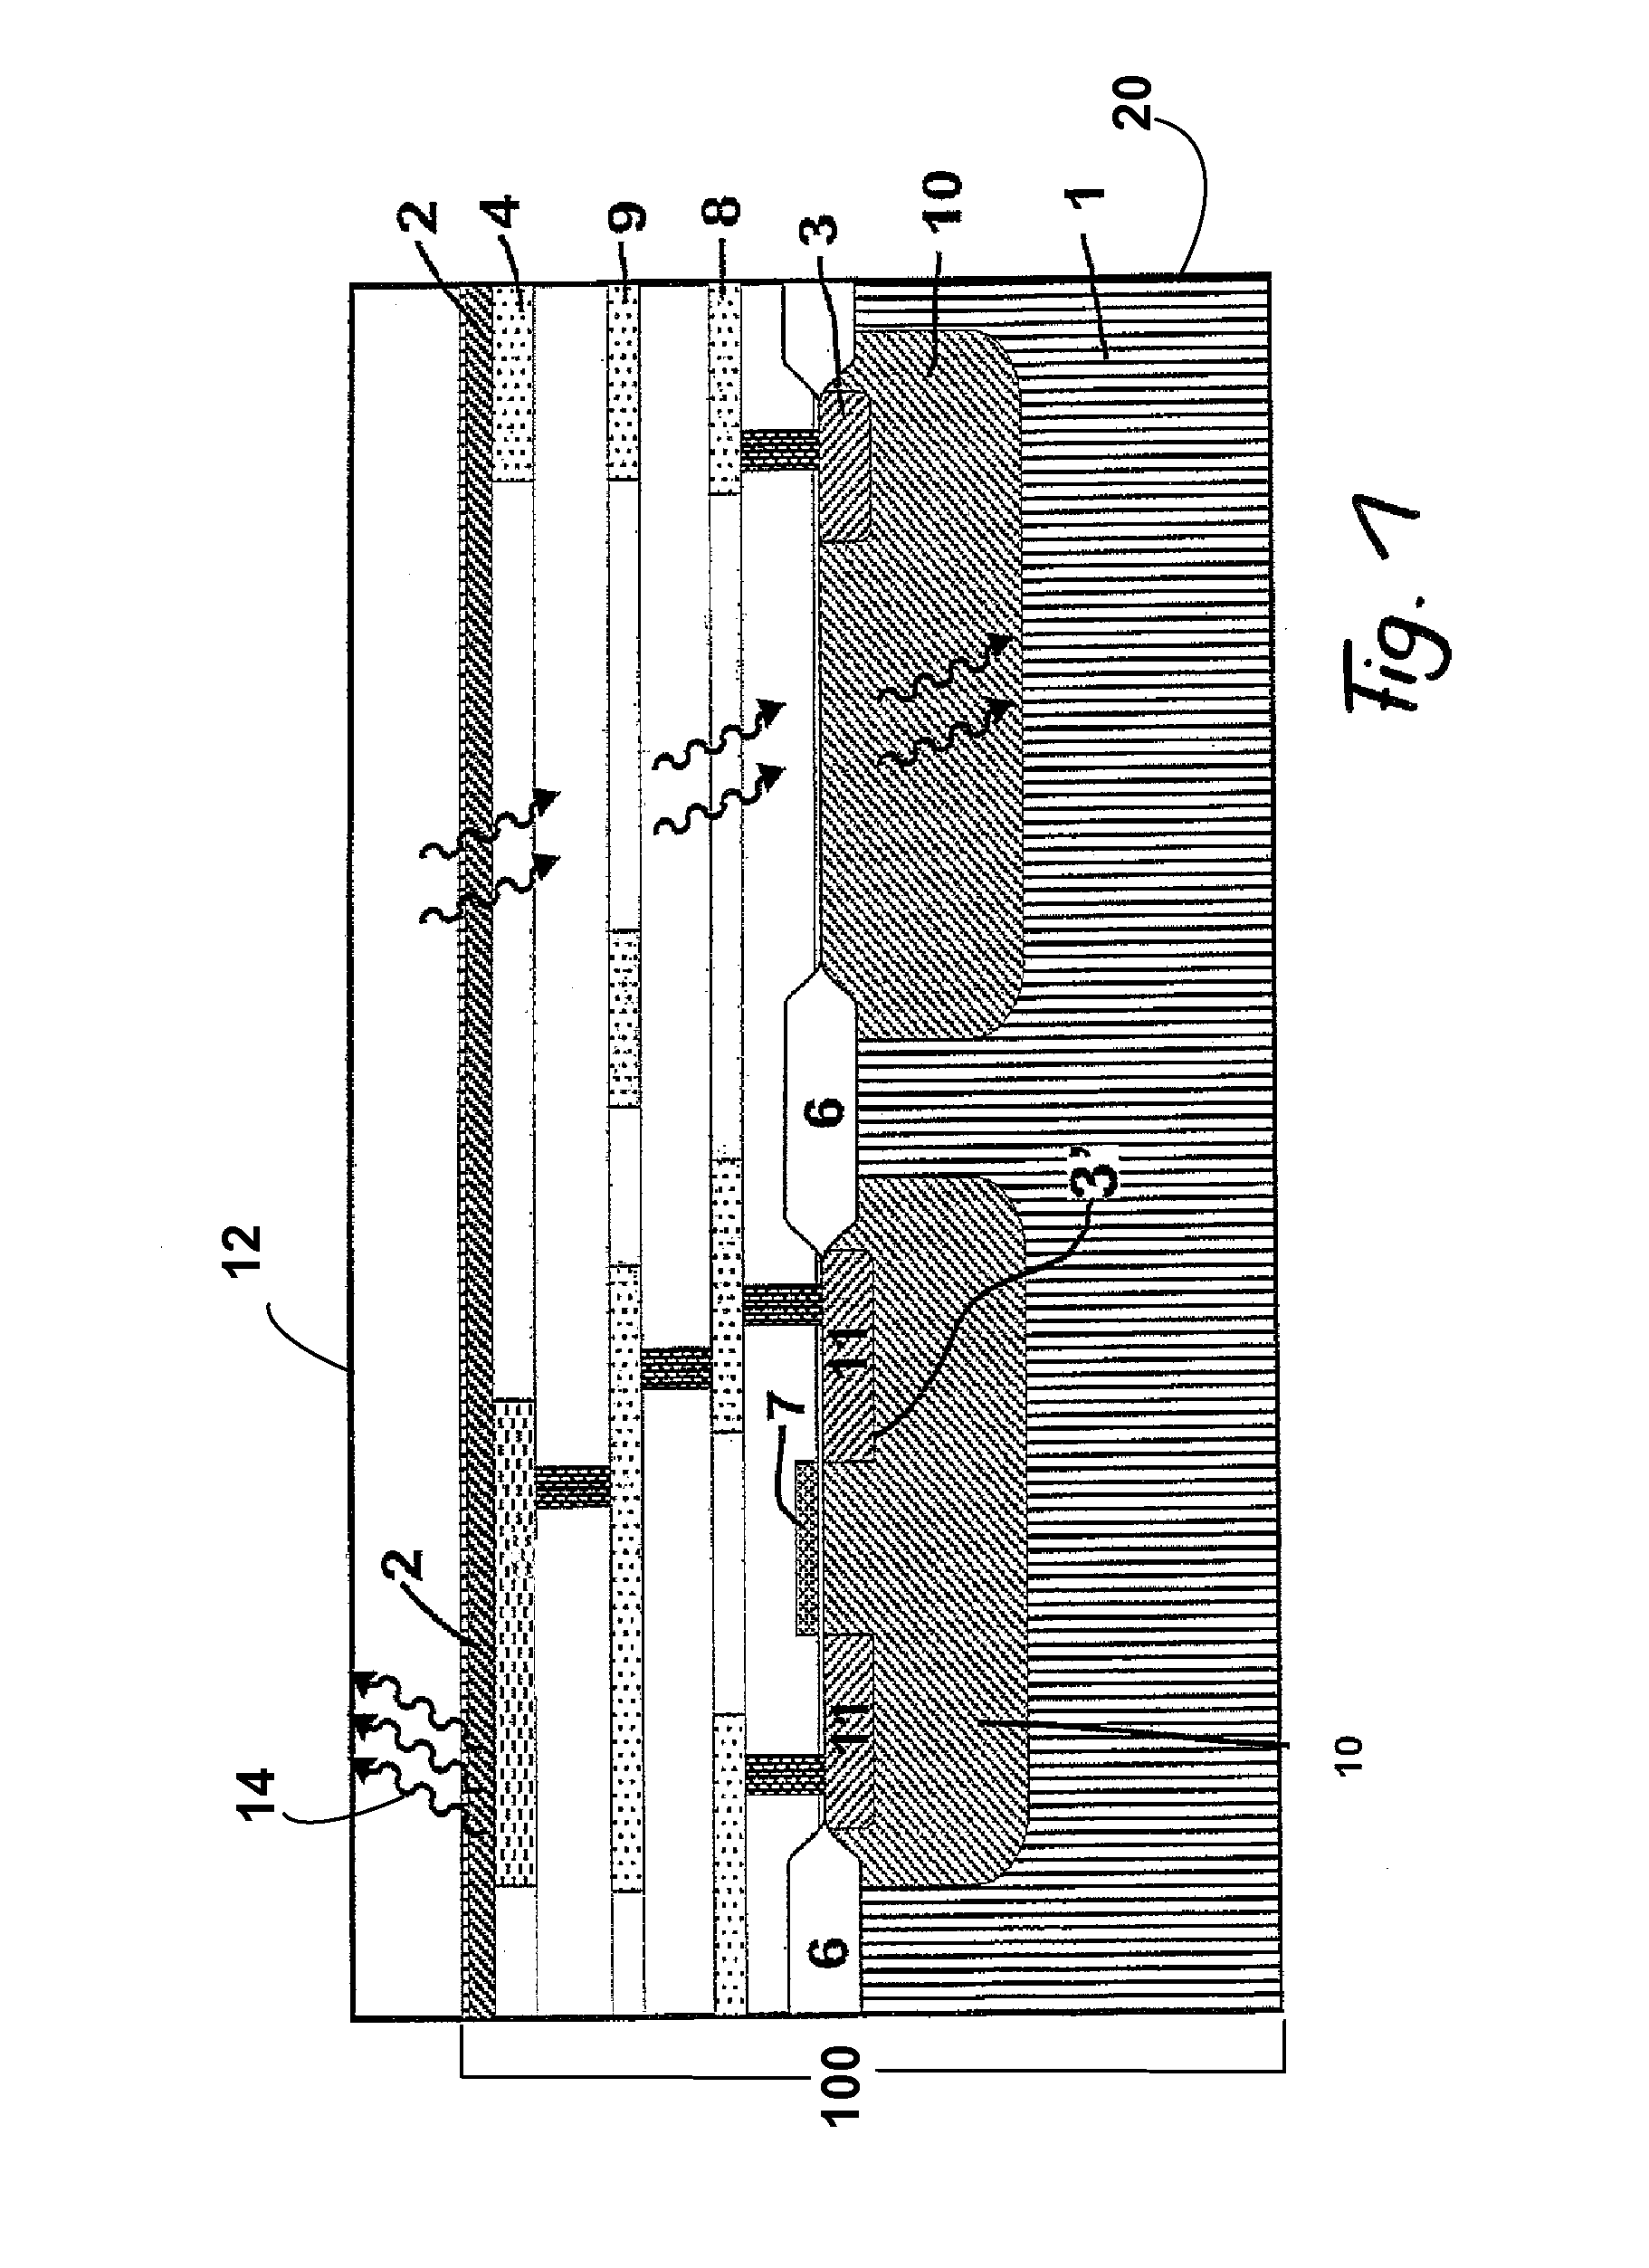 Optical arrangement comprising emitters and detectors on a common substrate